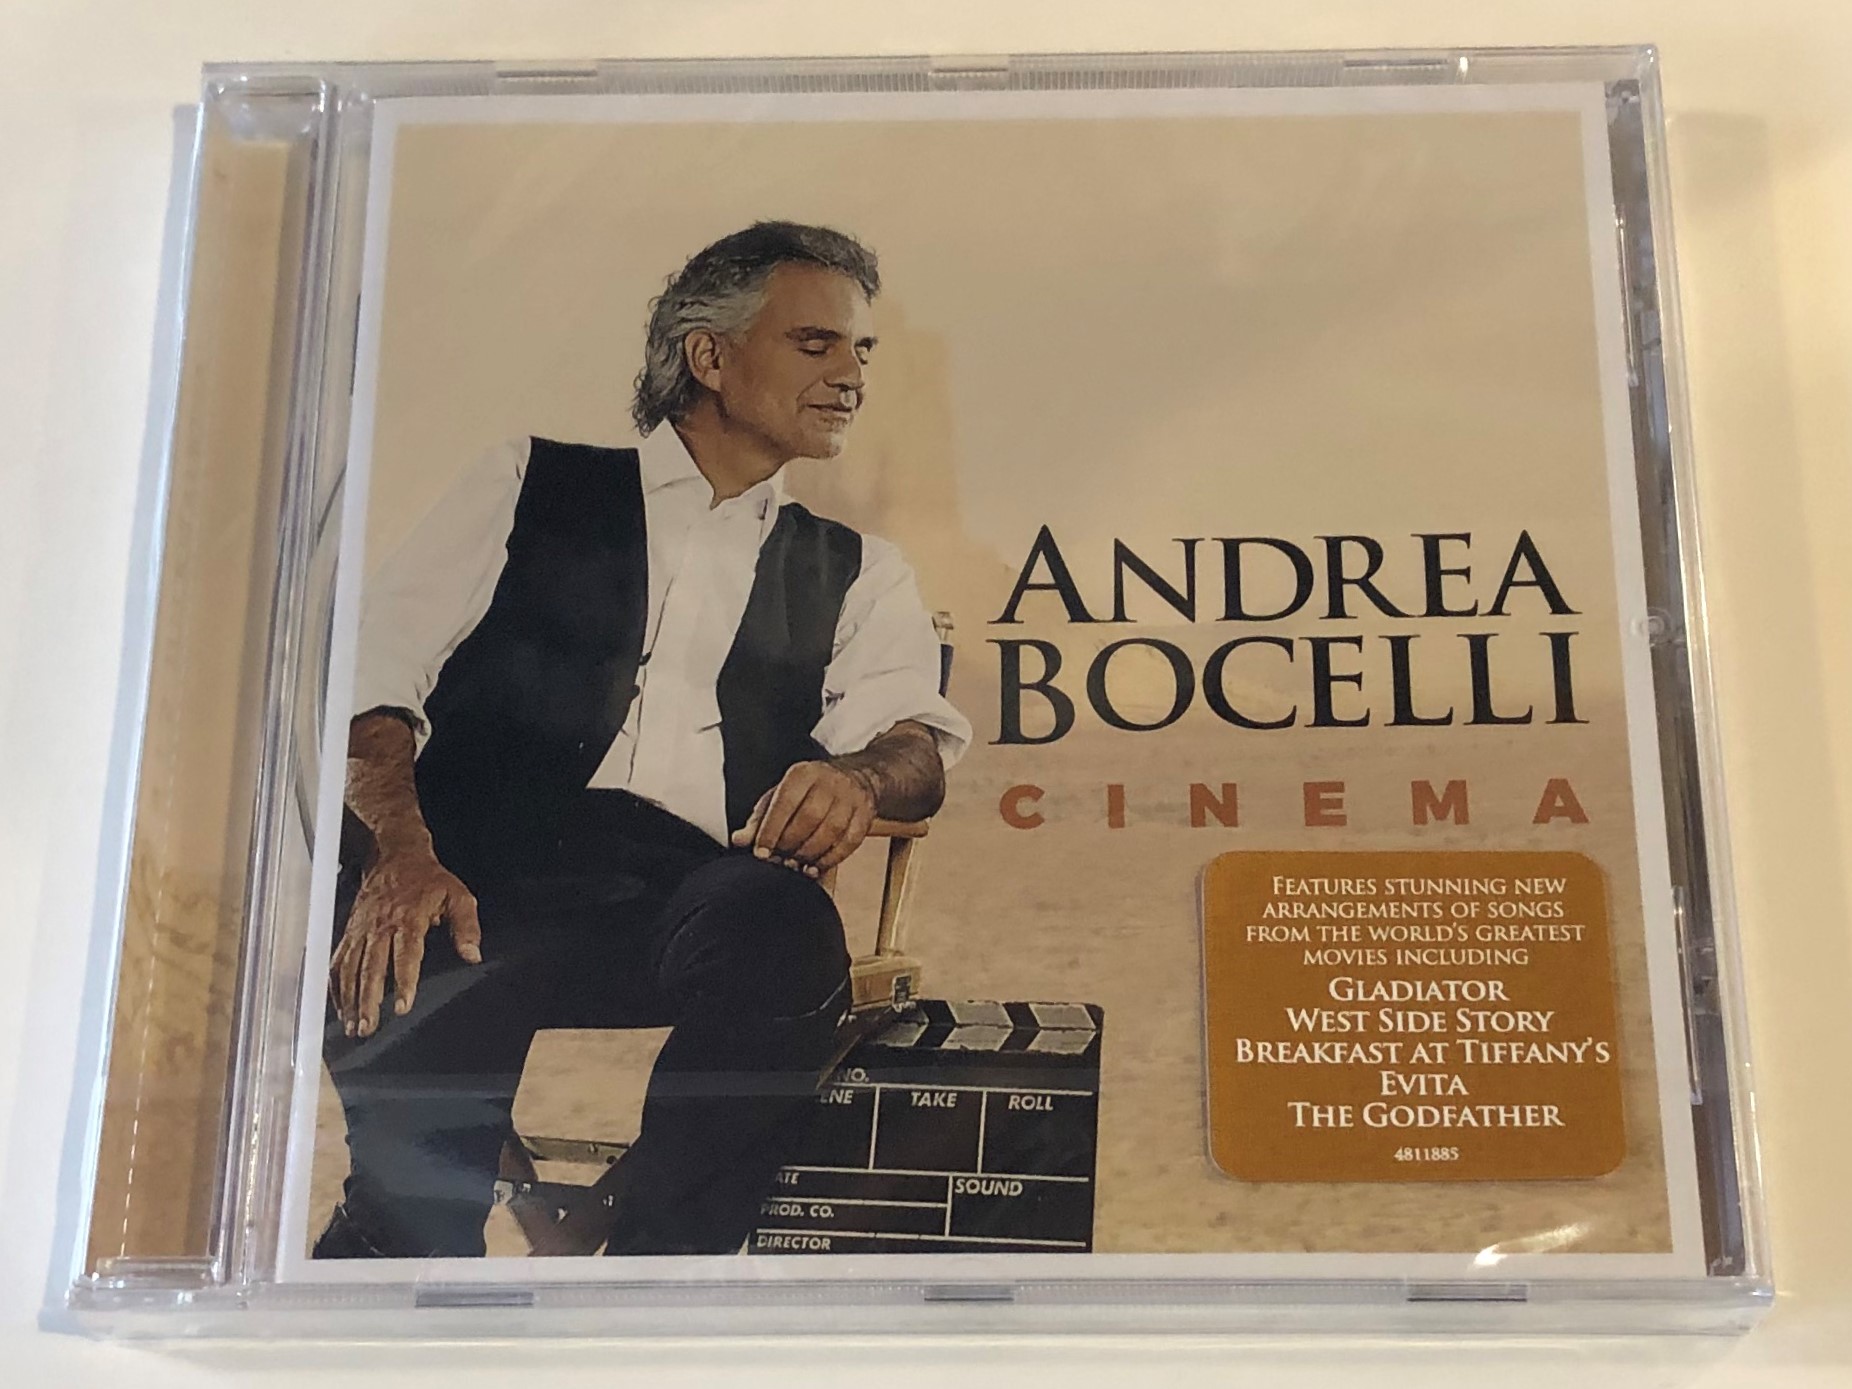 andrea-bocelli-cinema-features-stunning-new-arrangements-of-songs-from-the-world-s-greatest-movies-including-gladiator-west-side-story-breakfast-at-tiffany-s-evita-the-godfather-sugar-aud-1-.jpg